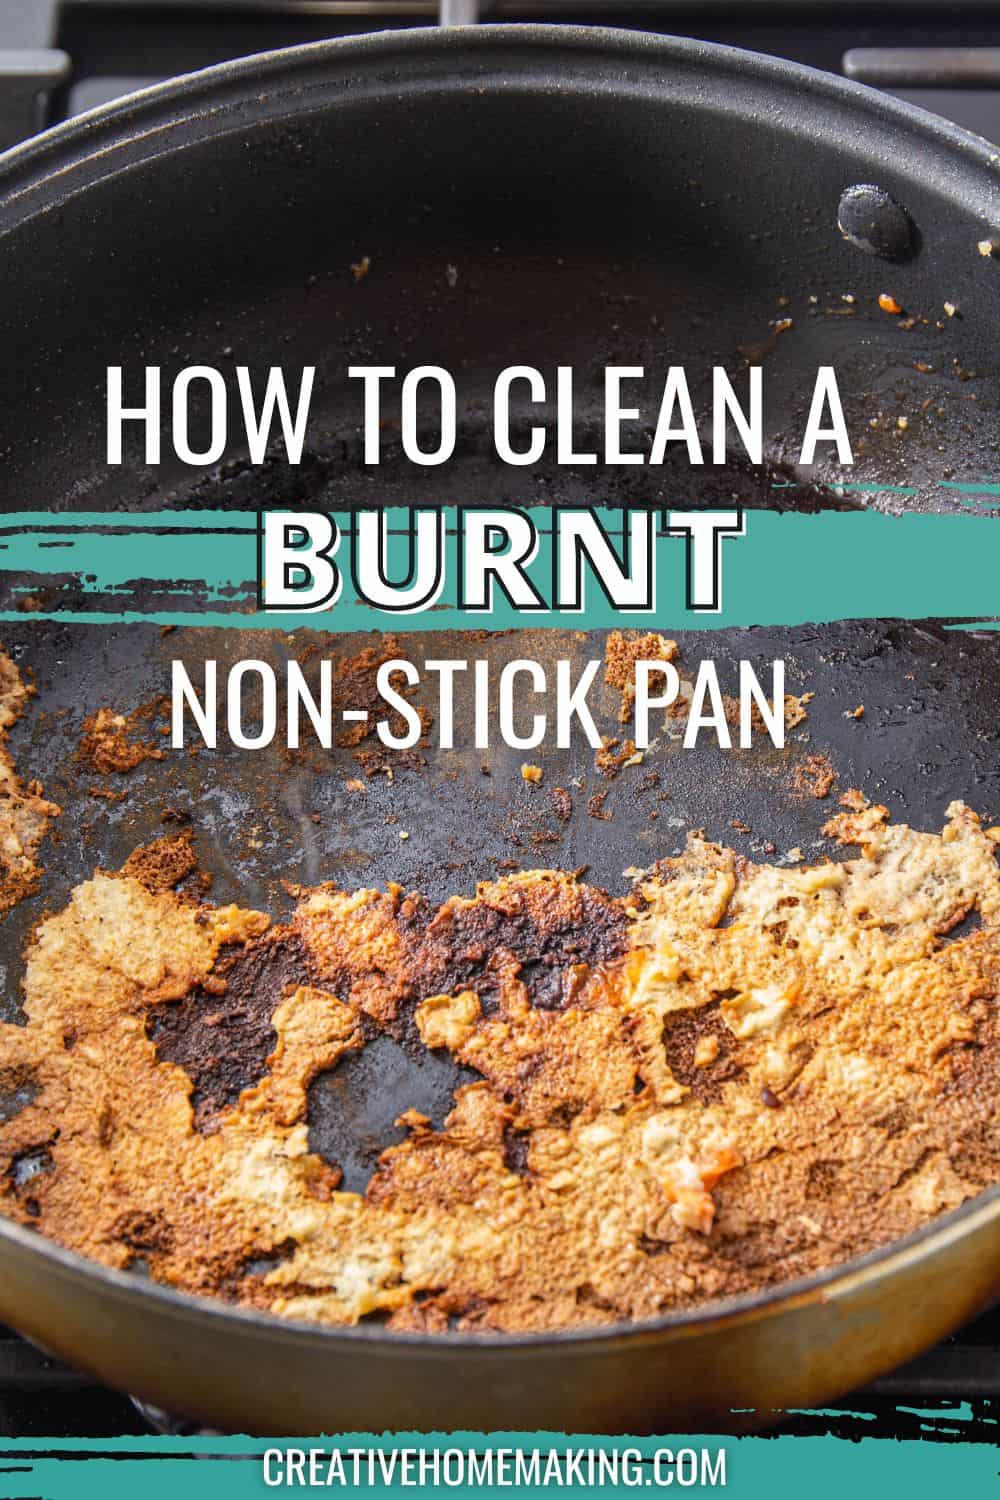 How to Clean Nonstick Pans